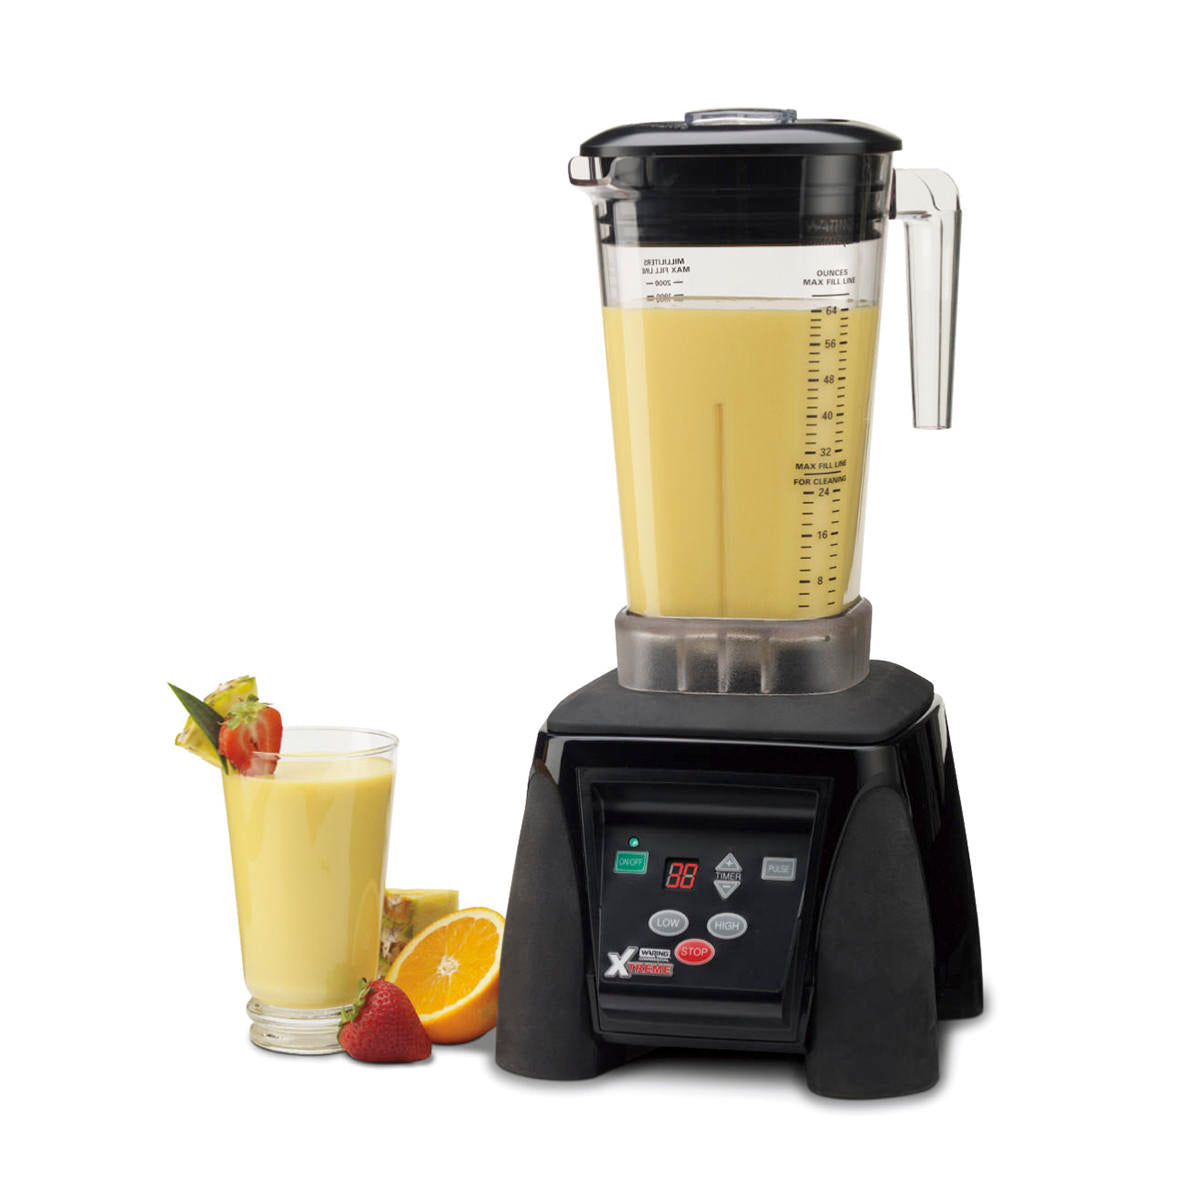 MX1100XTX Heavy-Duty Blender with Electronic Keypad, Timer & "The Raptor" 64 oz Copolyester Jar by Waring Commercial